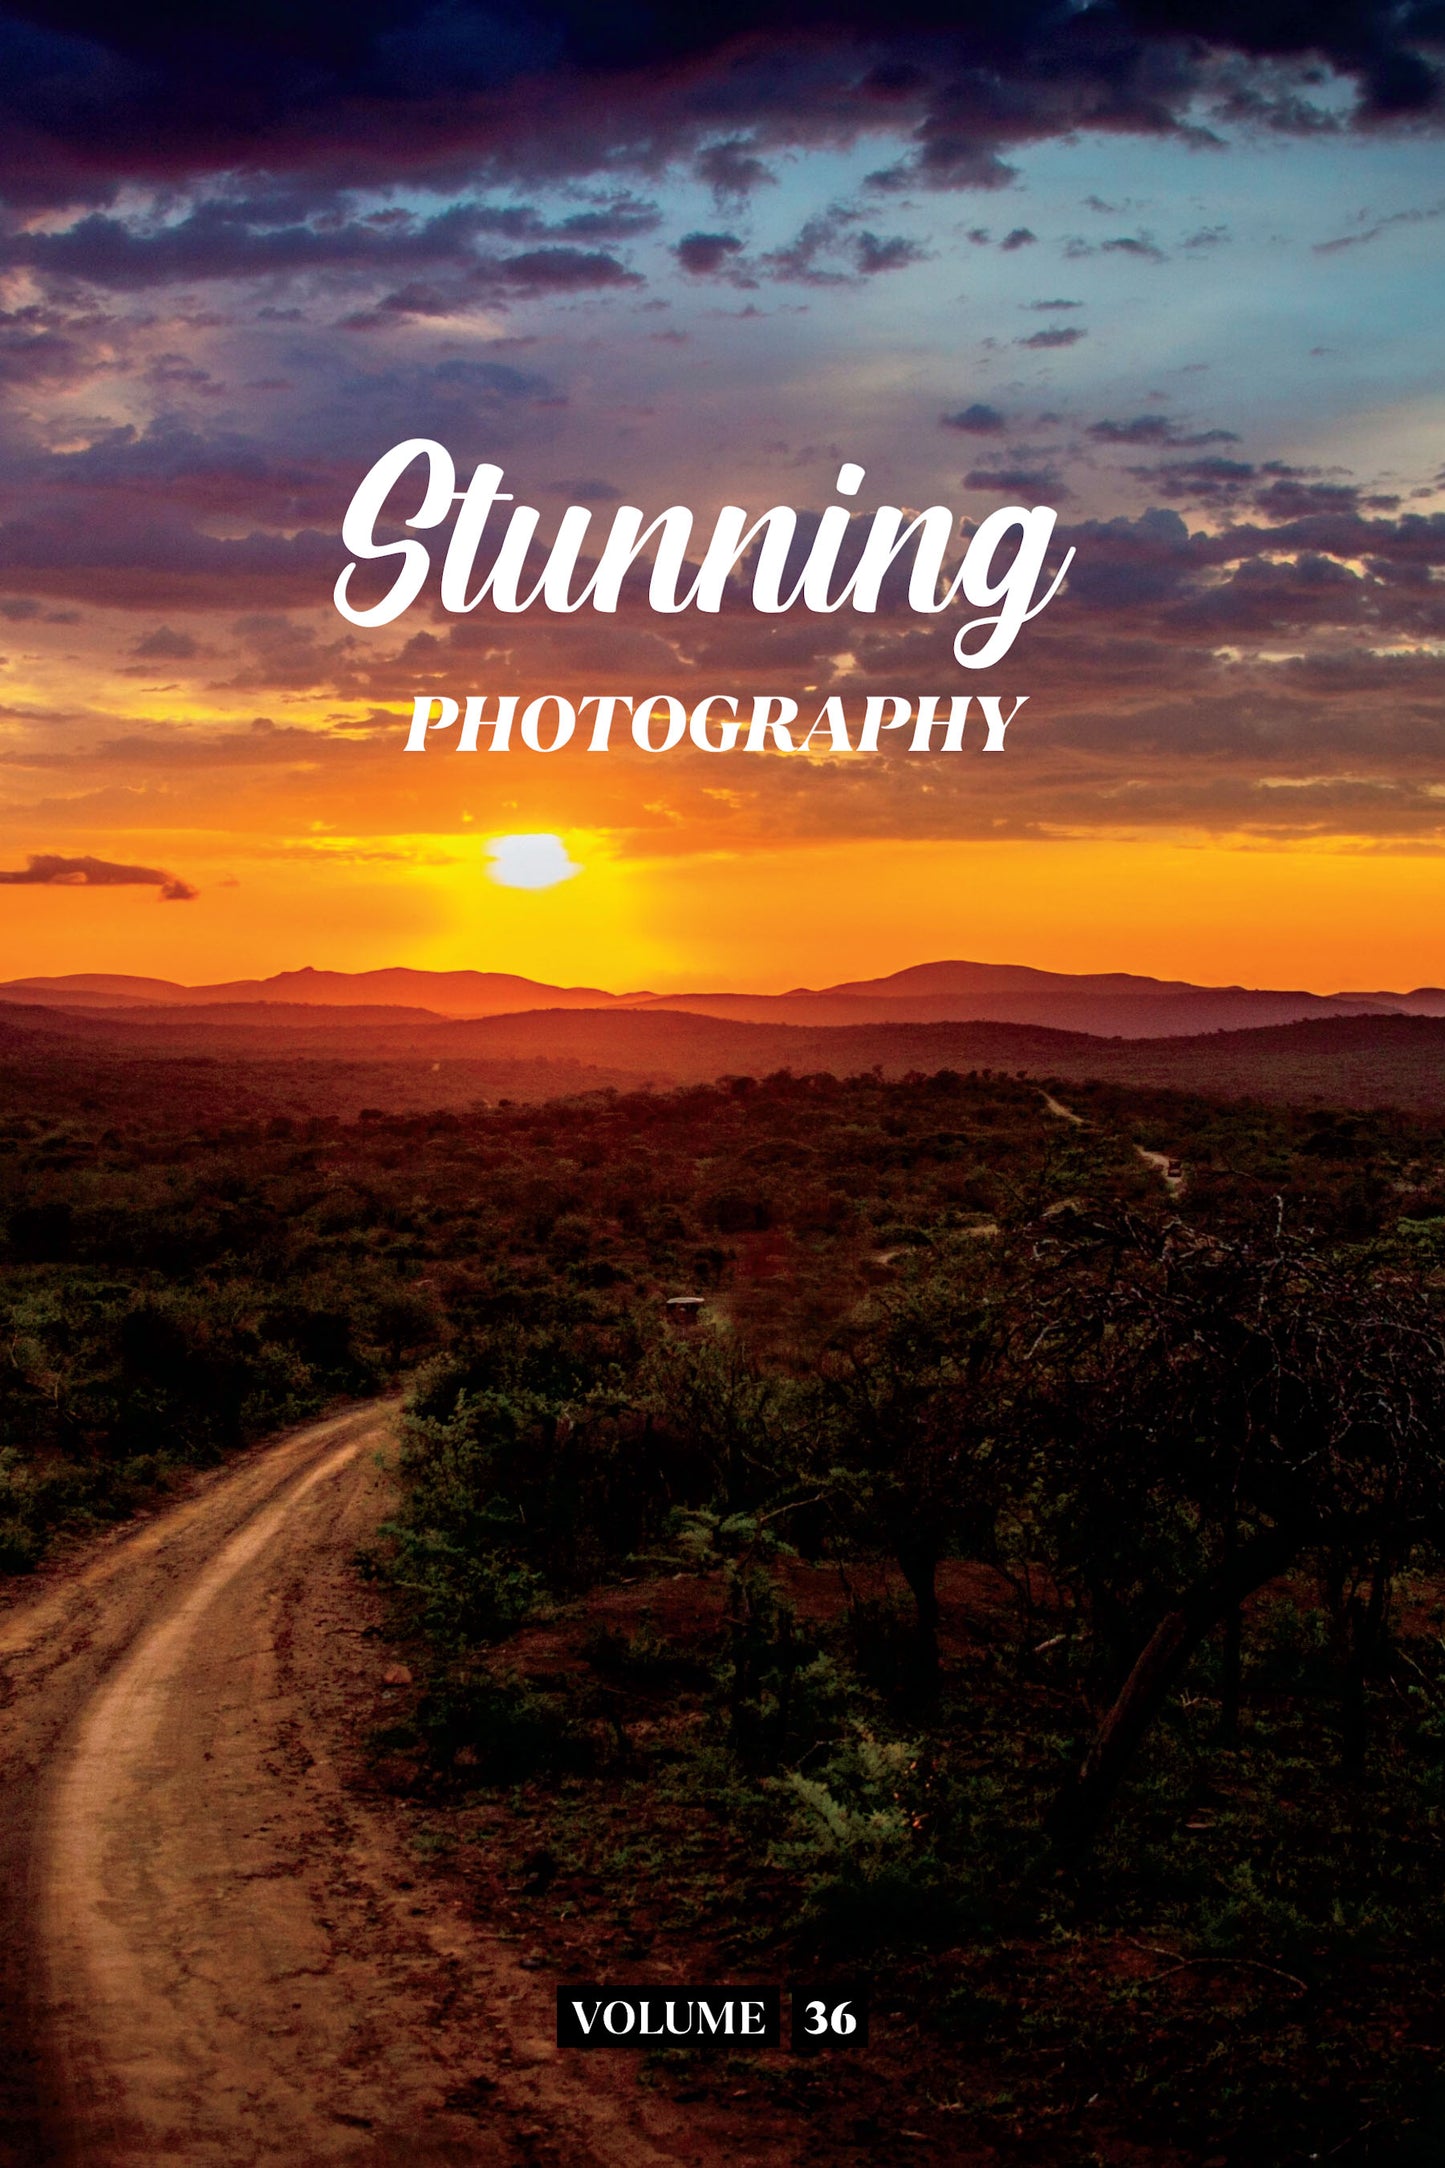 Stunning Photography Volume 36 (Physical Book Pre-Order)